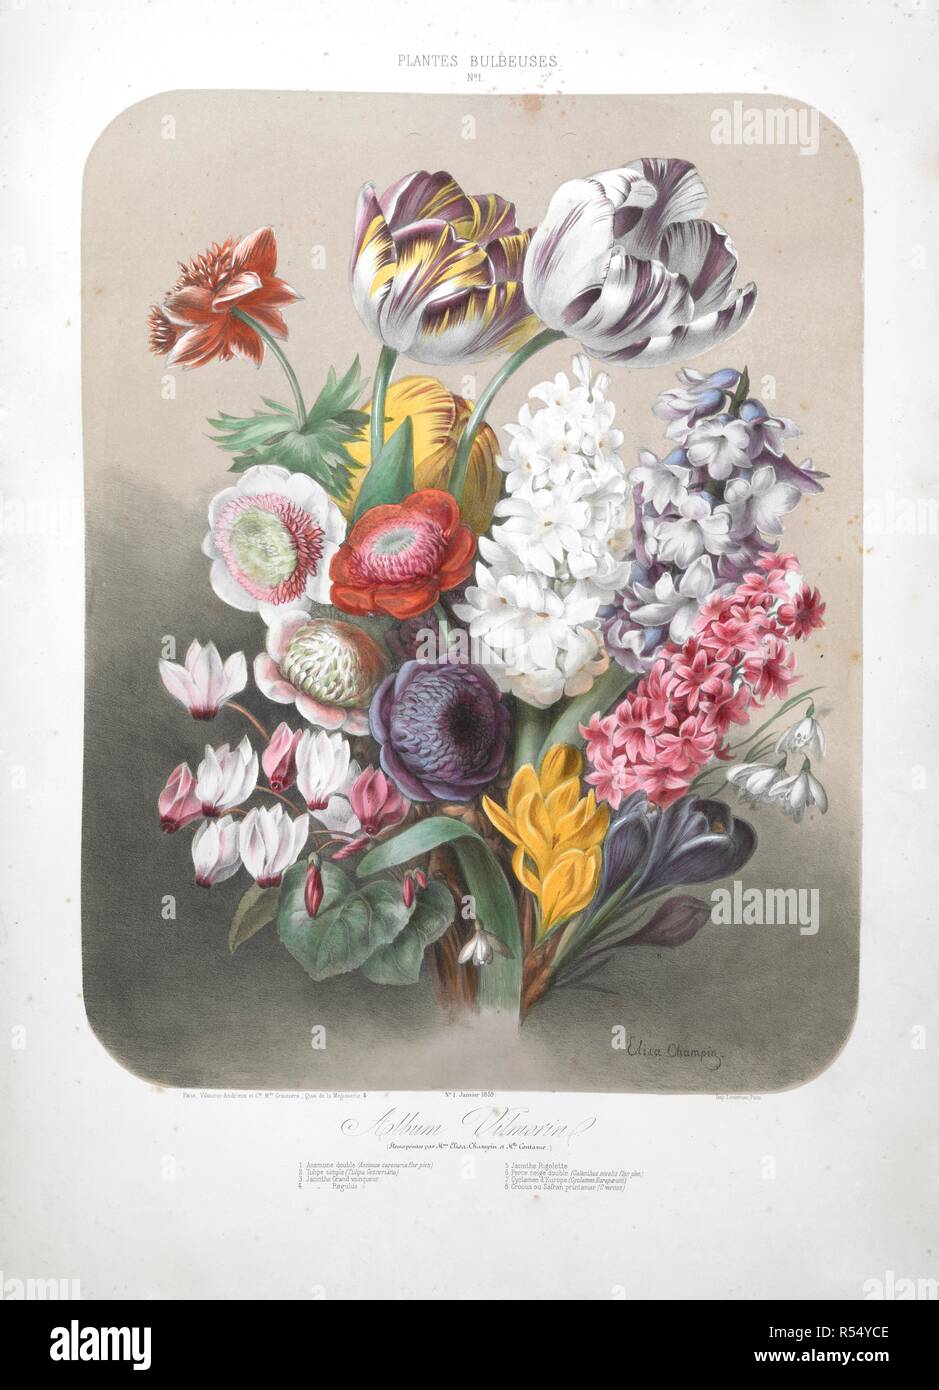 A bouquet of flowers including tulips, hyacinth, cyclamen, snowdrops, crocuses and peonies.  . Album Vilmorin. [68 Coloured plates of vegetables and flowers, printed by E. Champin and Mlle. Coutance.]. Paris, [1850]. Source: N.Tab.2004/11 (2) plate 1. Author: CHAMPIN, ELISA. de Vilmorin, Pierre LÃ©vÃªque. Stock Photo